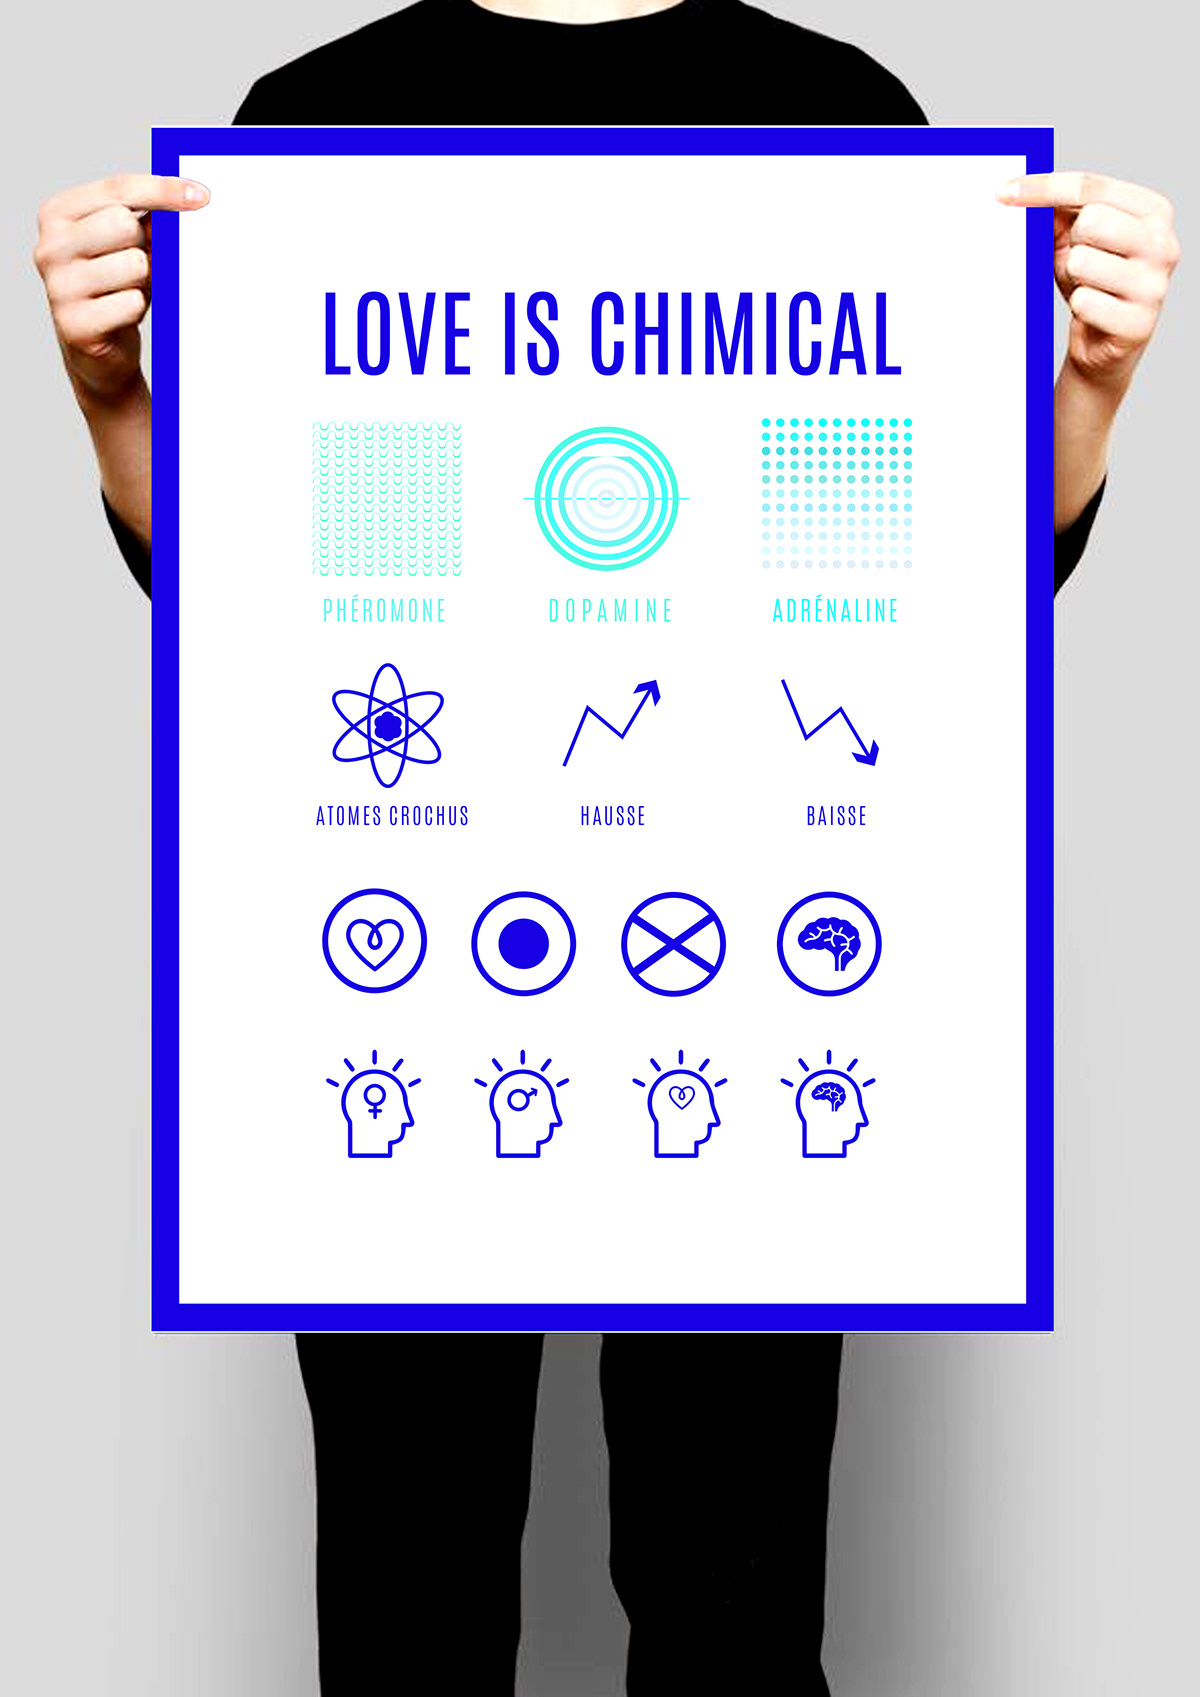 #love #chimical #chimical Love #graphic design #posters #brain #hormonal #colors love at first sight Love amour coup de foudre corps textile